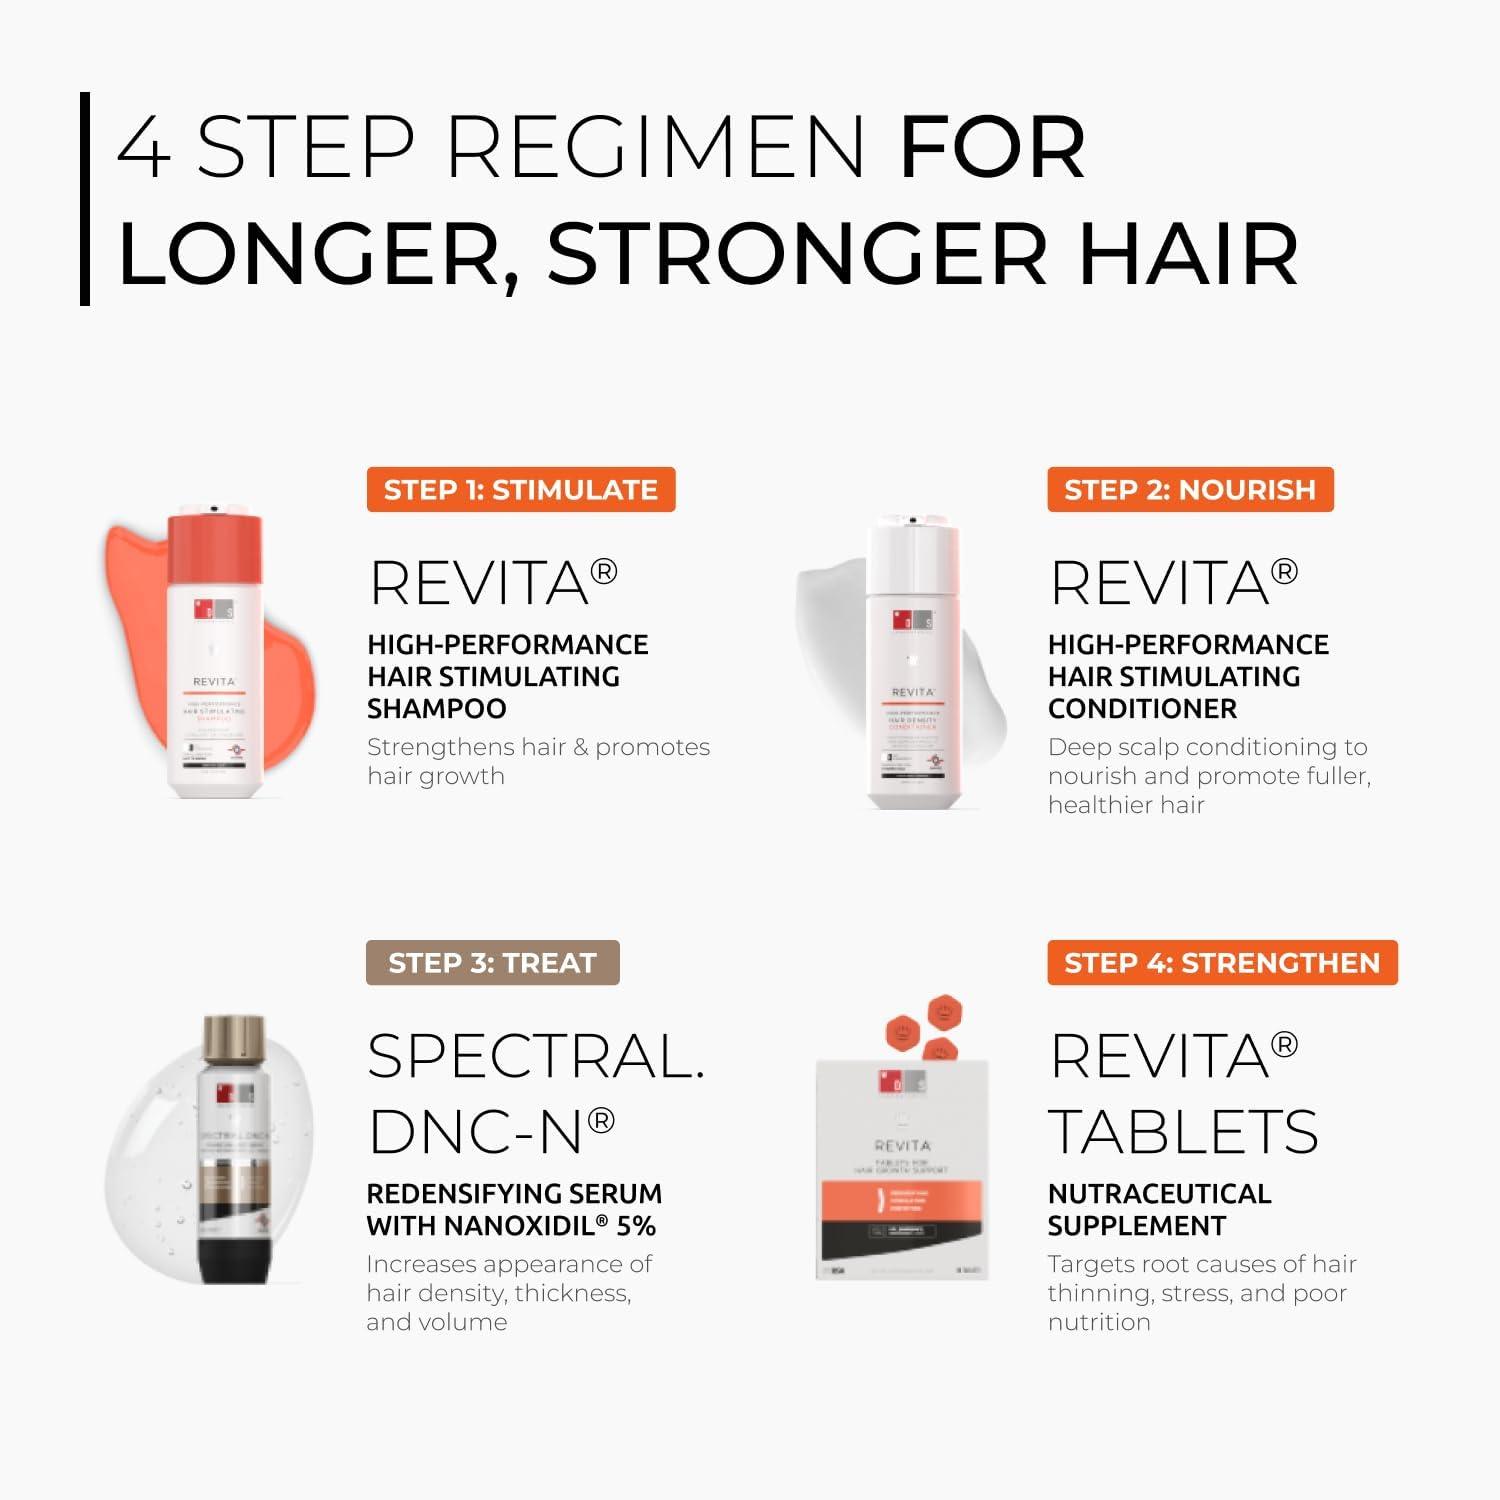 DS LABORATORIES Revita Shampoo and Conditioner Set, Hair Thickening Shampoo and Conditioner to Support Hair Growth, Sulfate Free Shampoo and Conditioner with Biotin, Caffeine & DHT Blocker, Hair Care